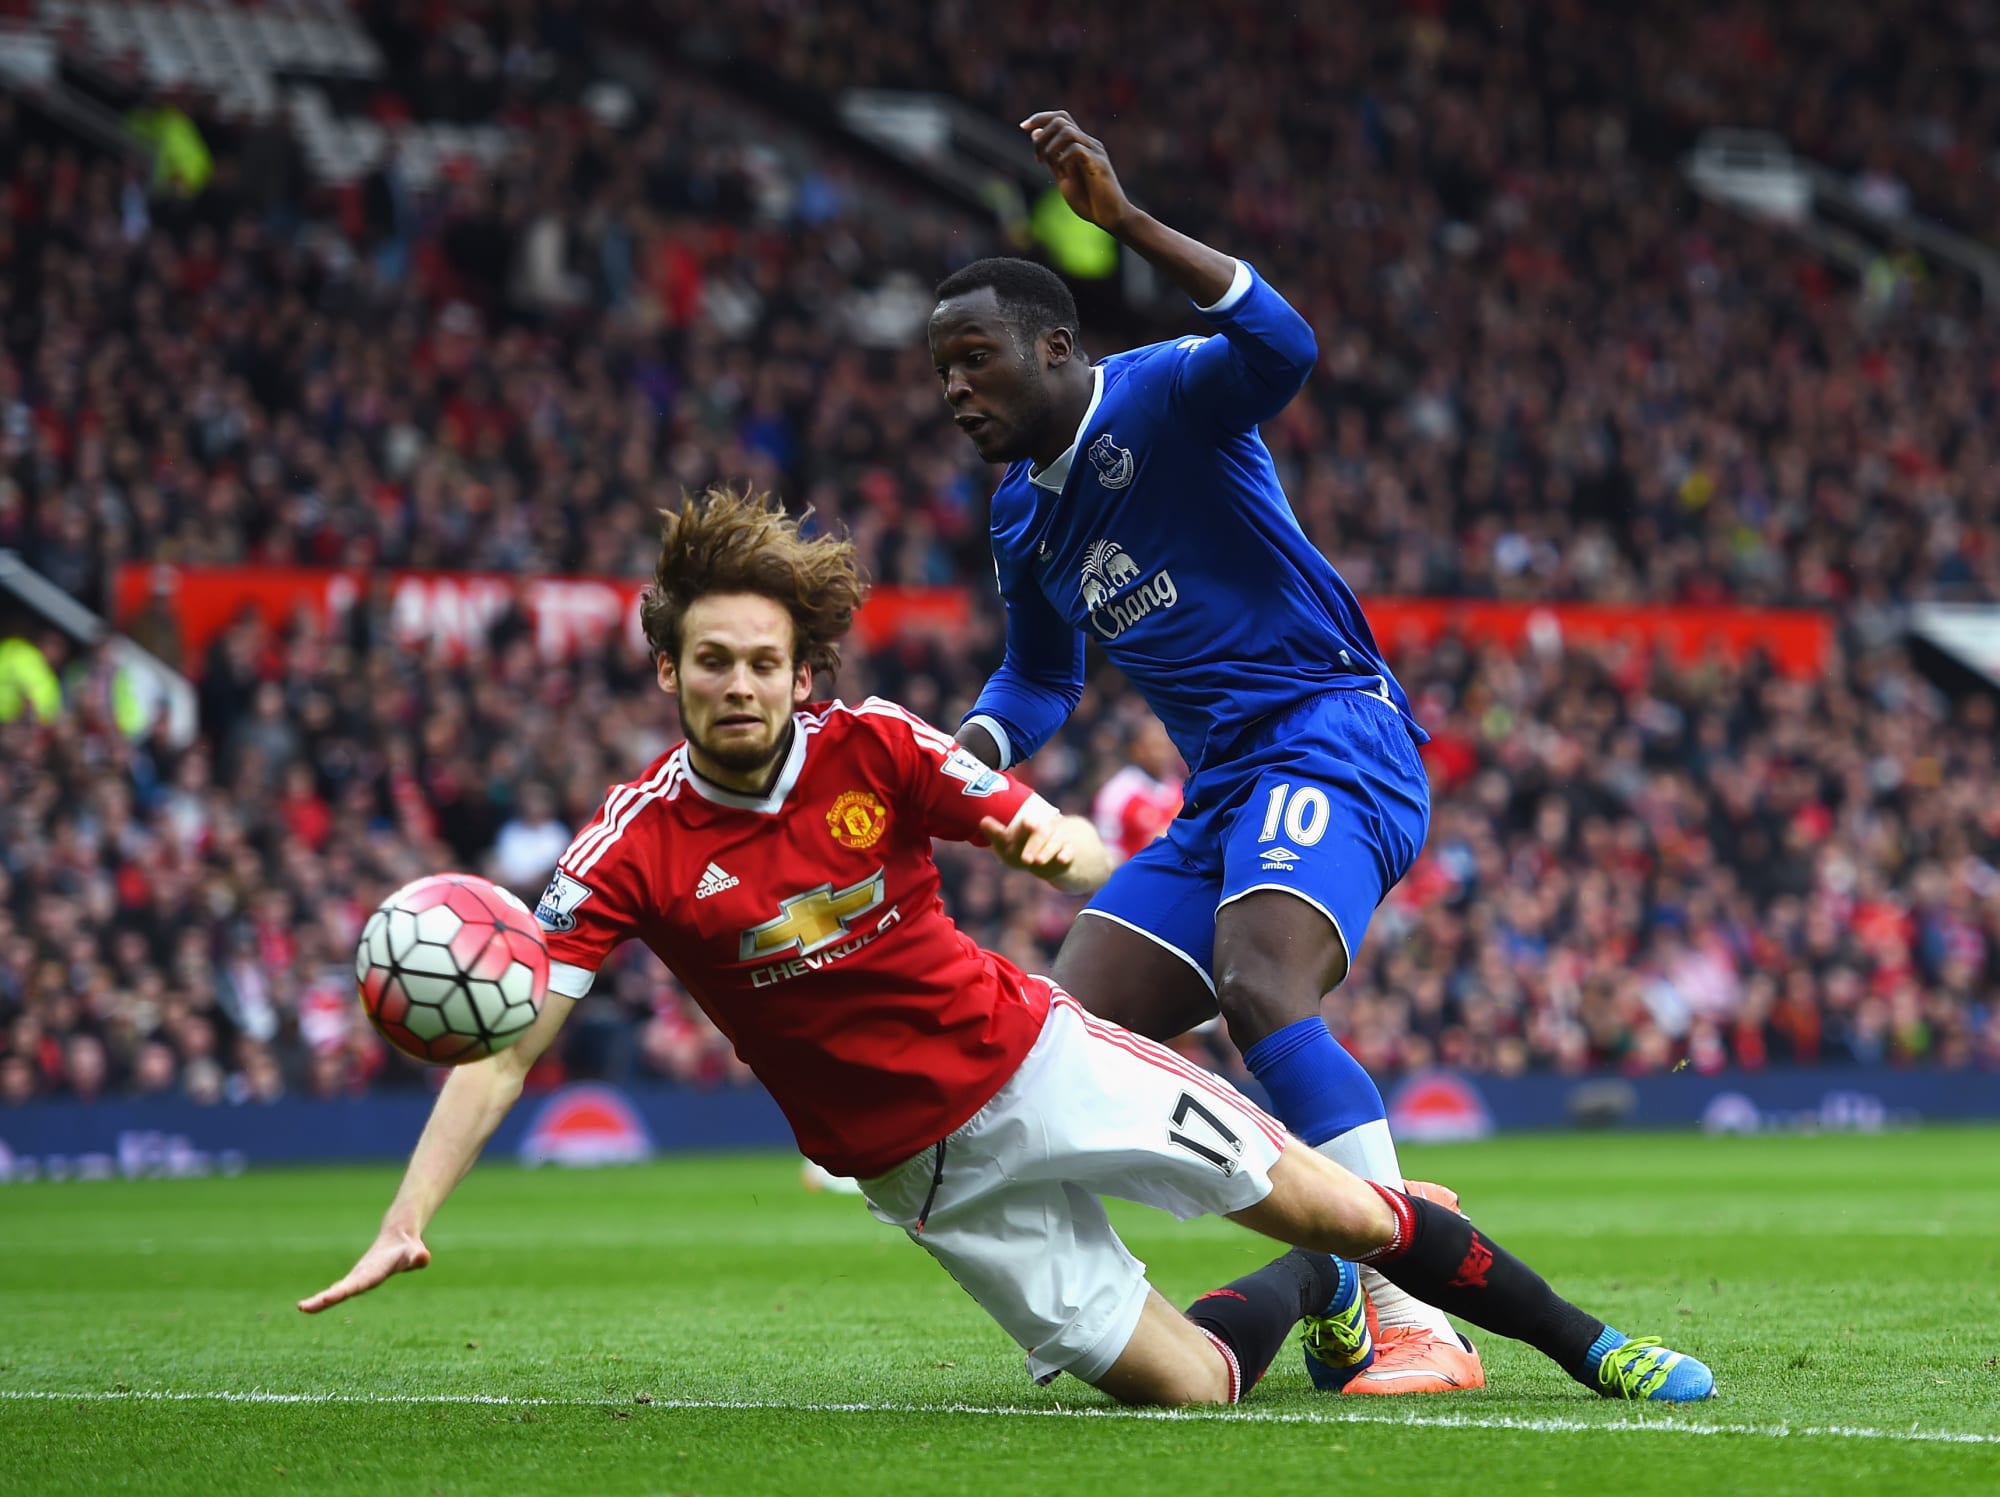 Manchester United 1-0 Everton: Player Ratings